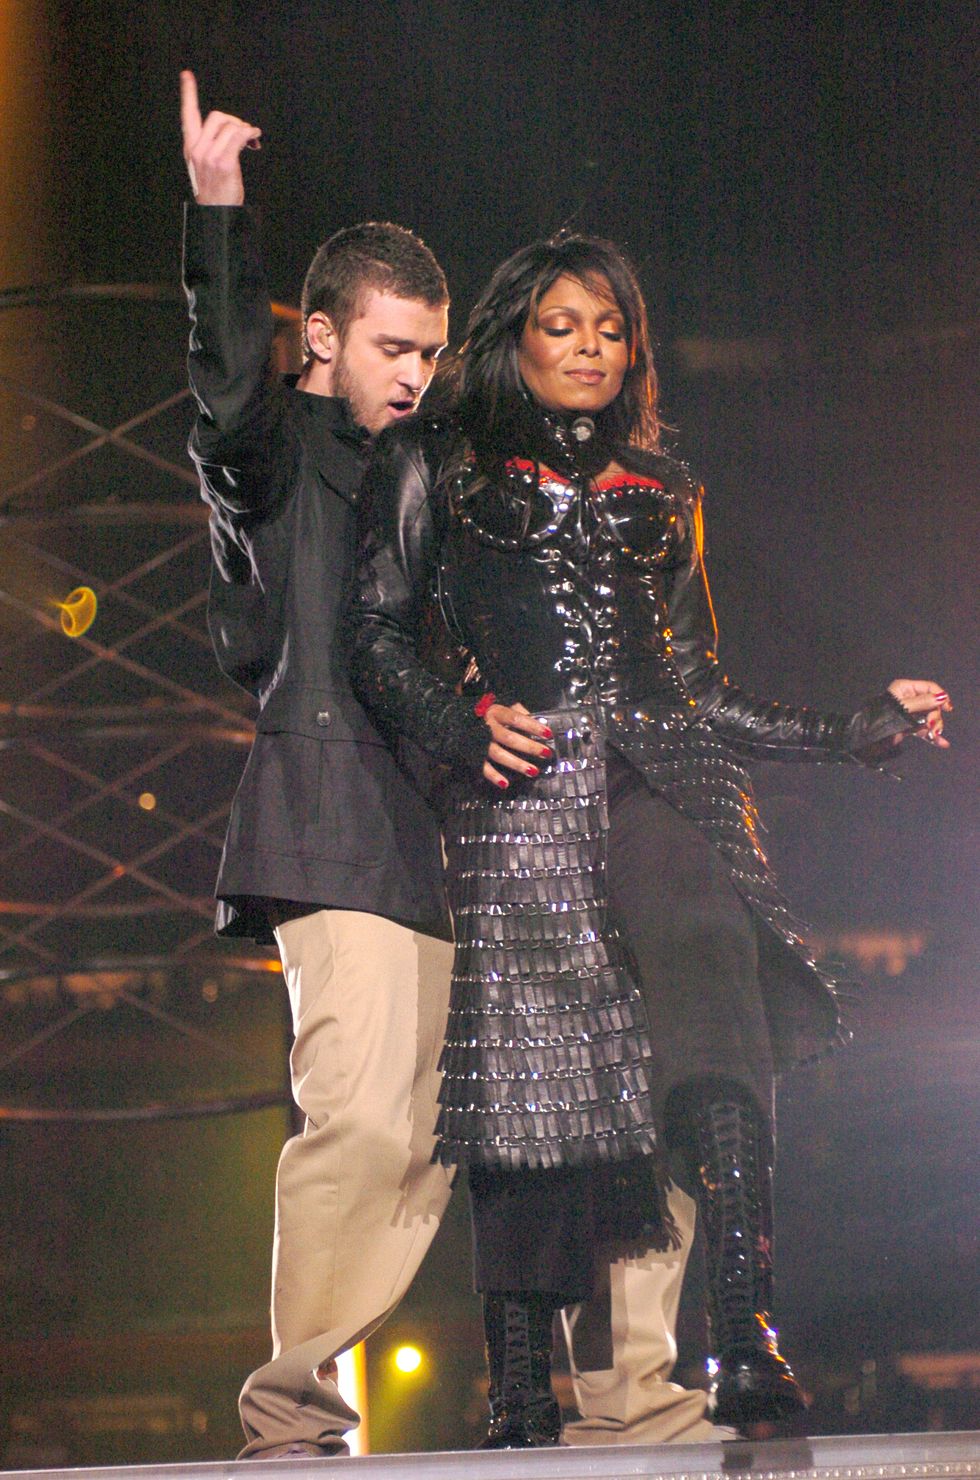 the aol topspeed super bowl xxxviii halftime show produced by mtv